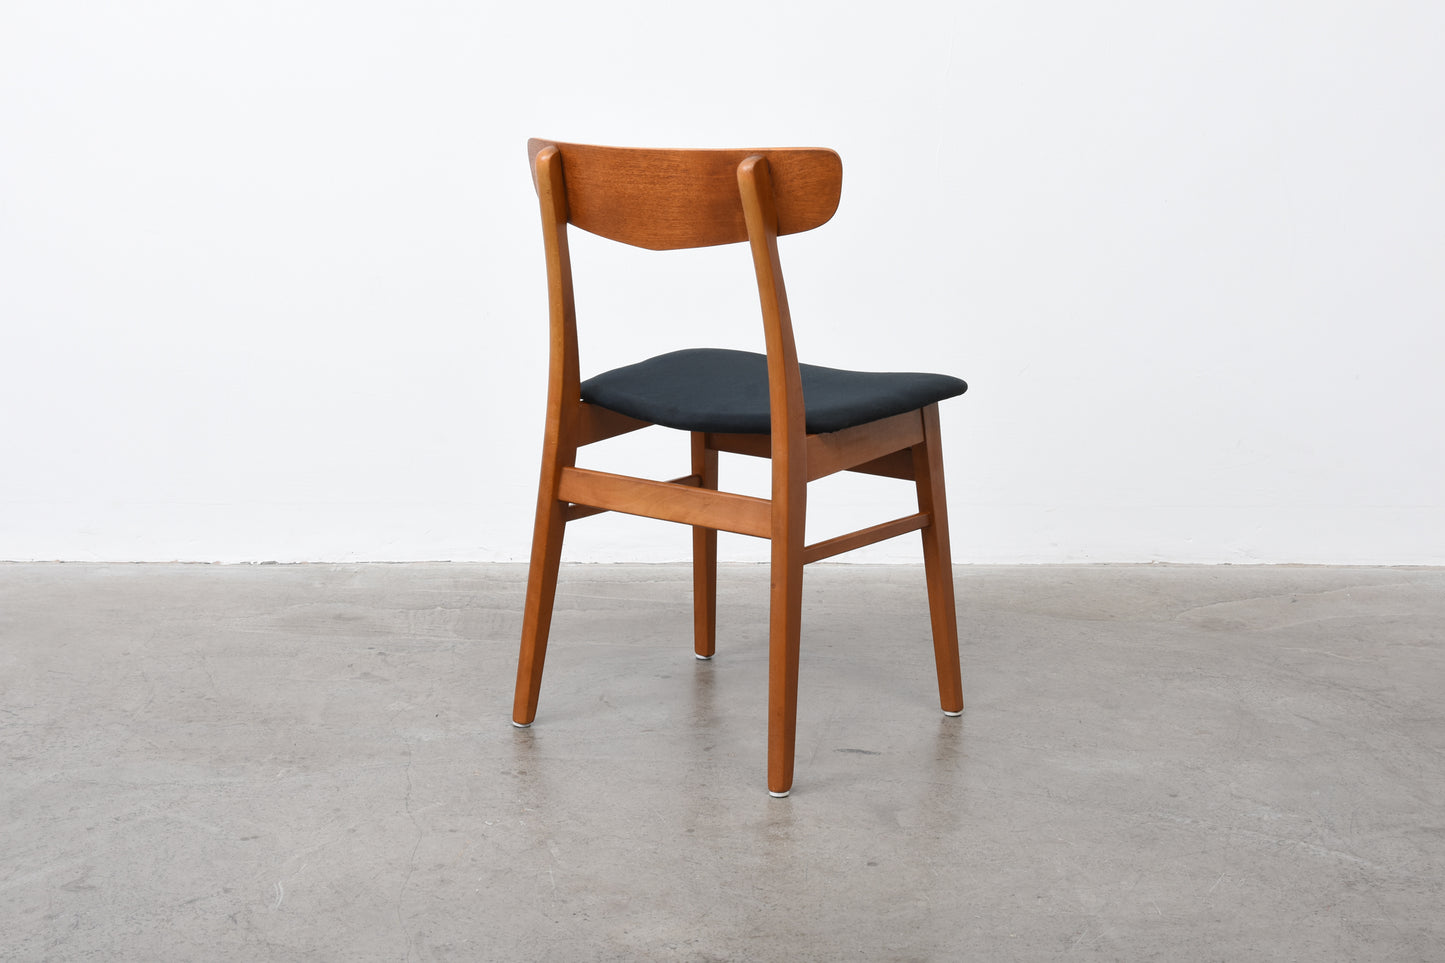 Newly upholstered: Set of four 1960s teak + beech chairs by Farstrup